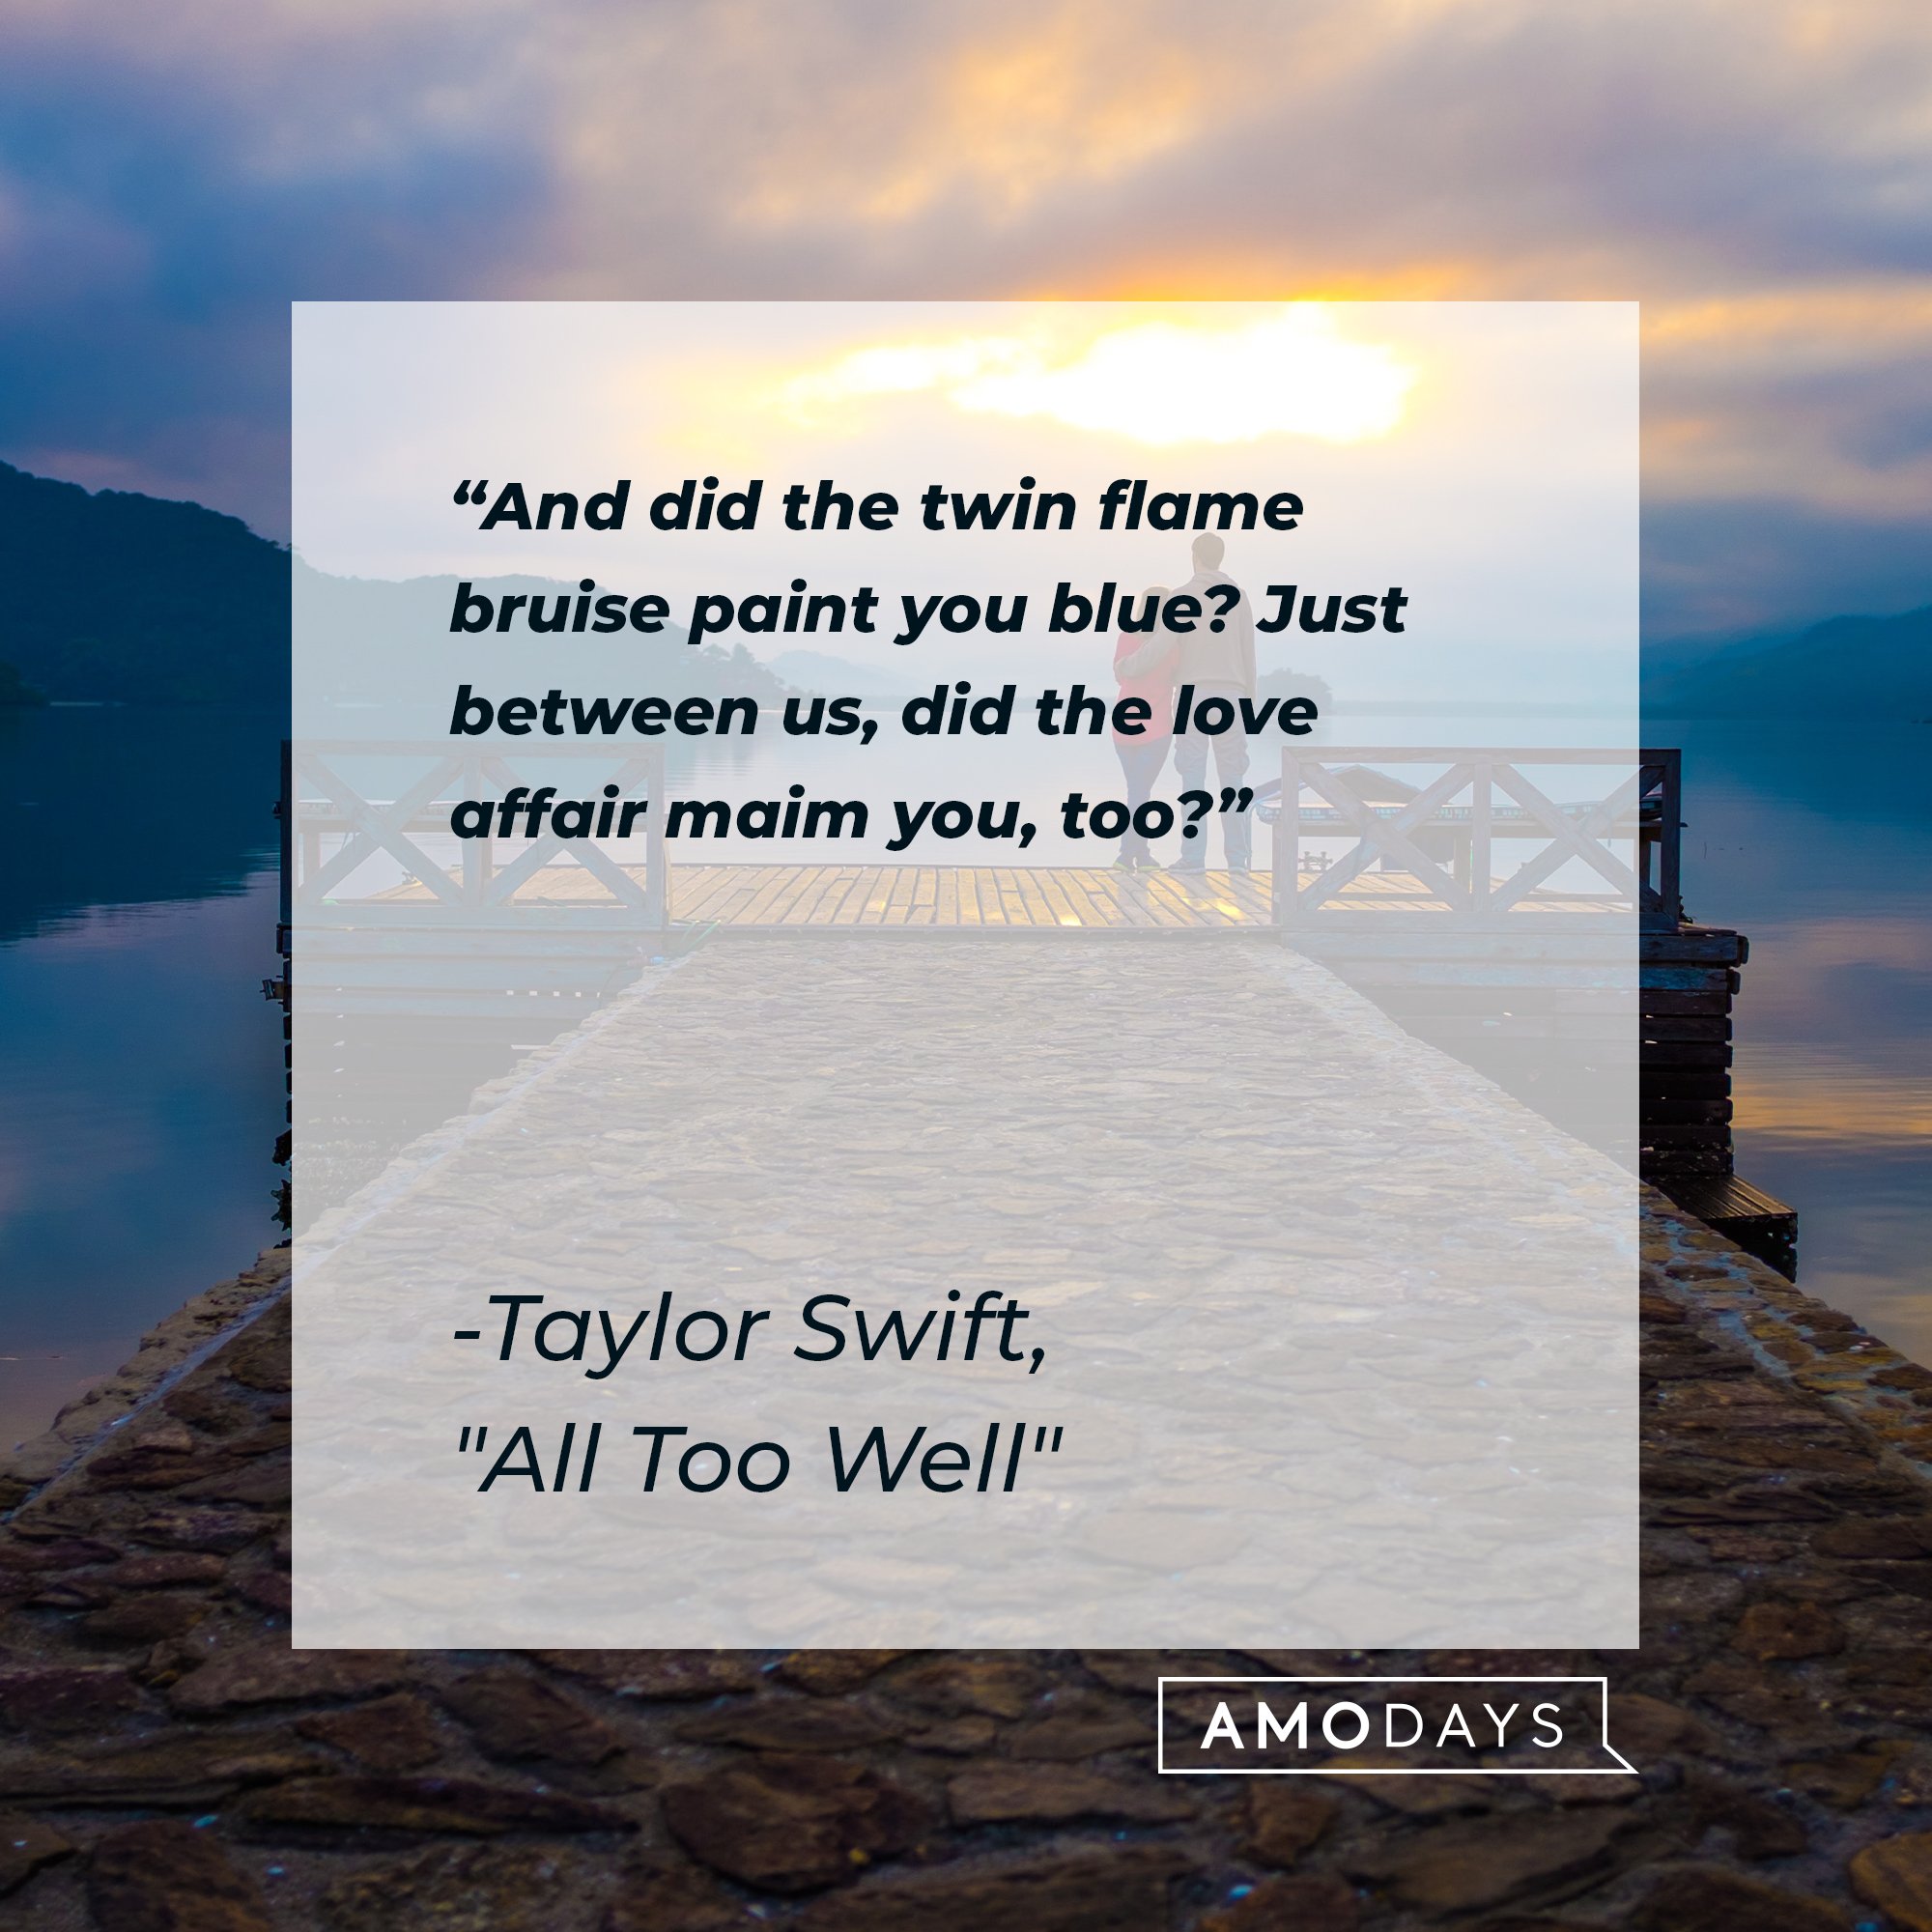  Taylor Swift’s quote from her song "All Too Well": "And did the twin flame bruise paint you blue? Just between us, did the love affair maim you, too?" | Image: AmoDays